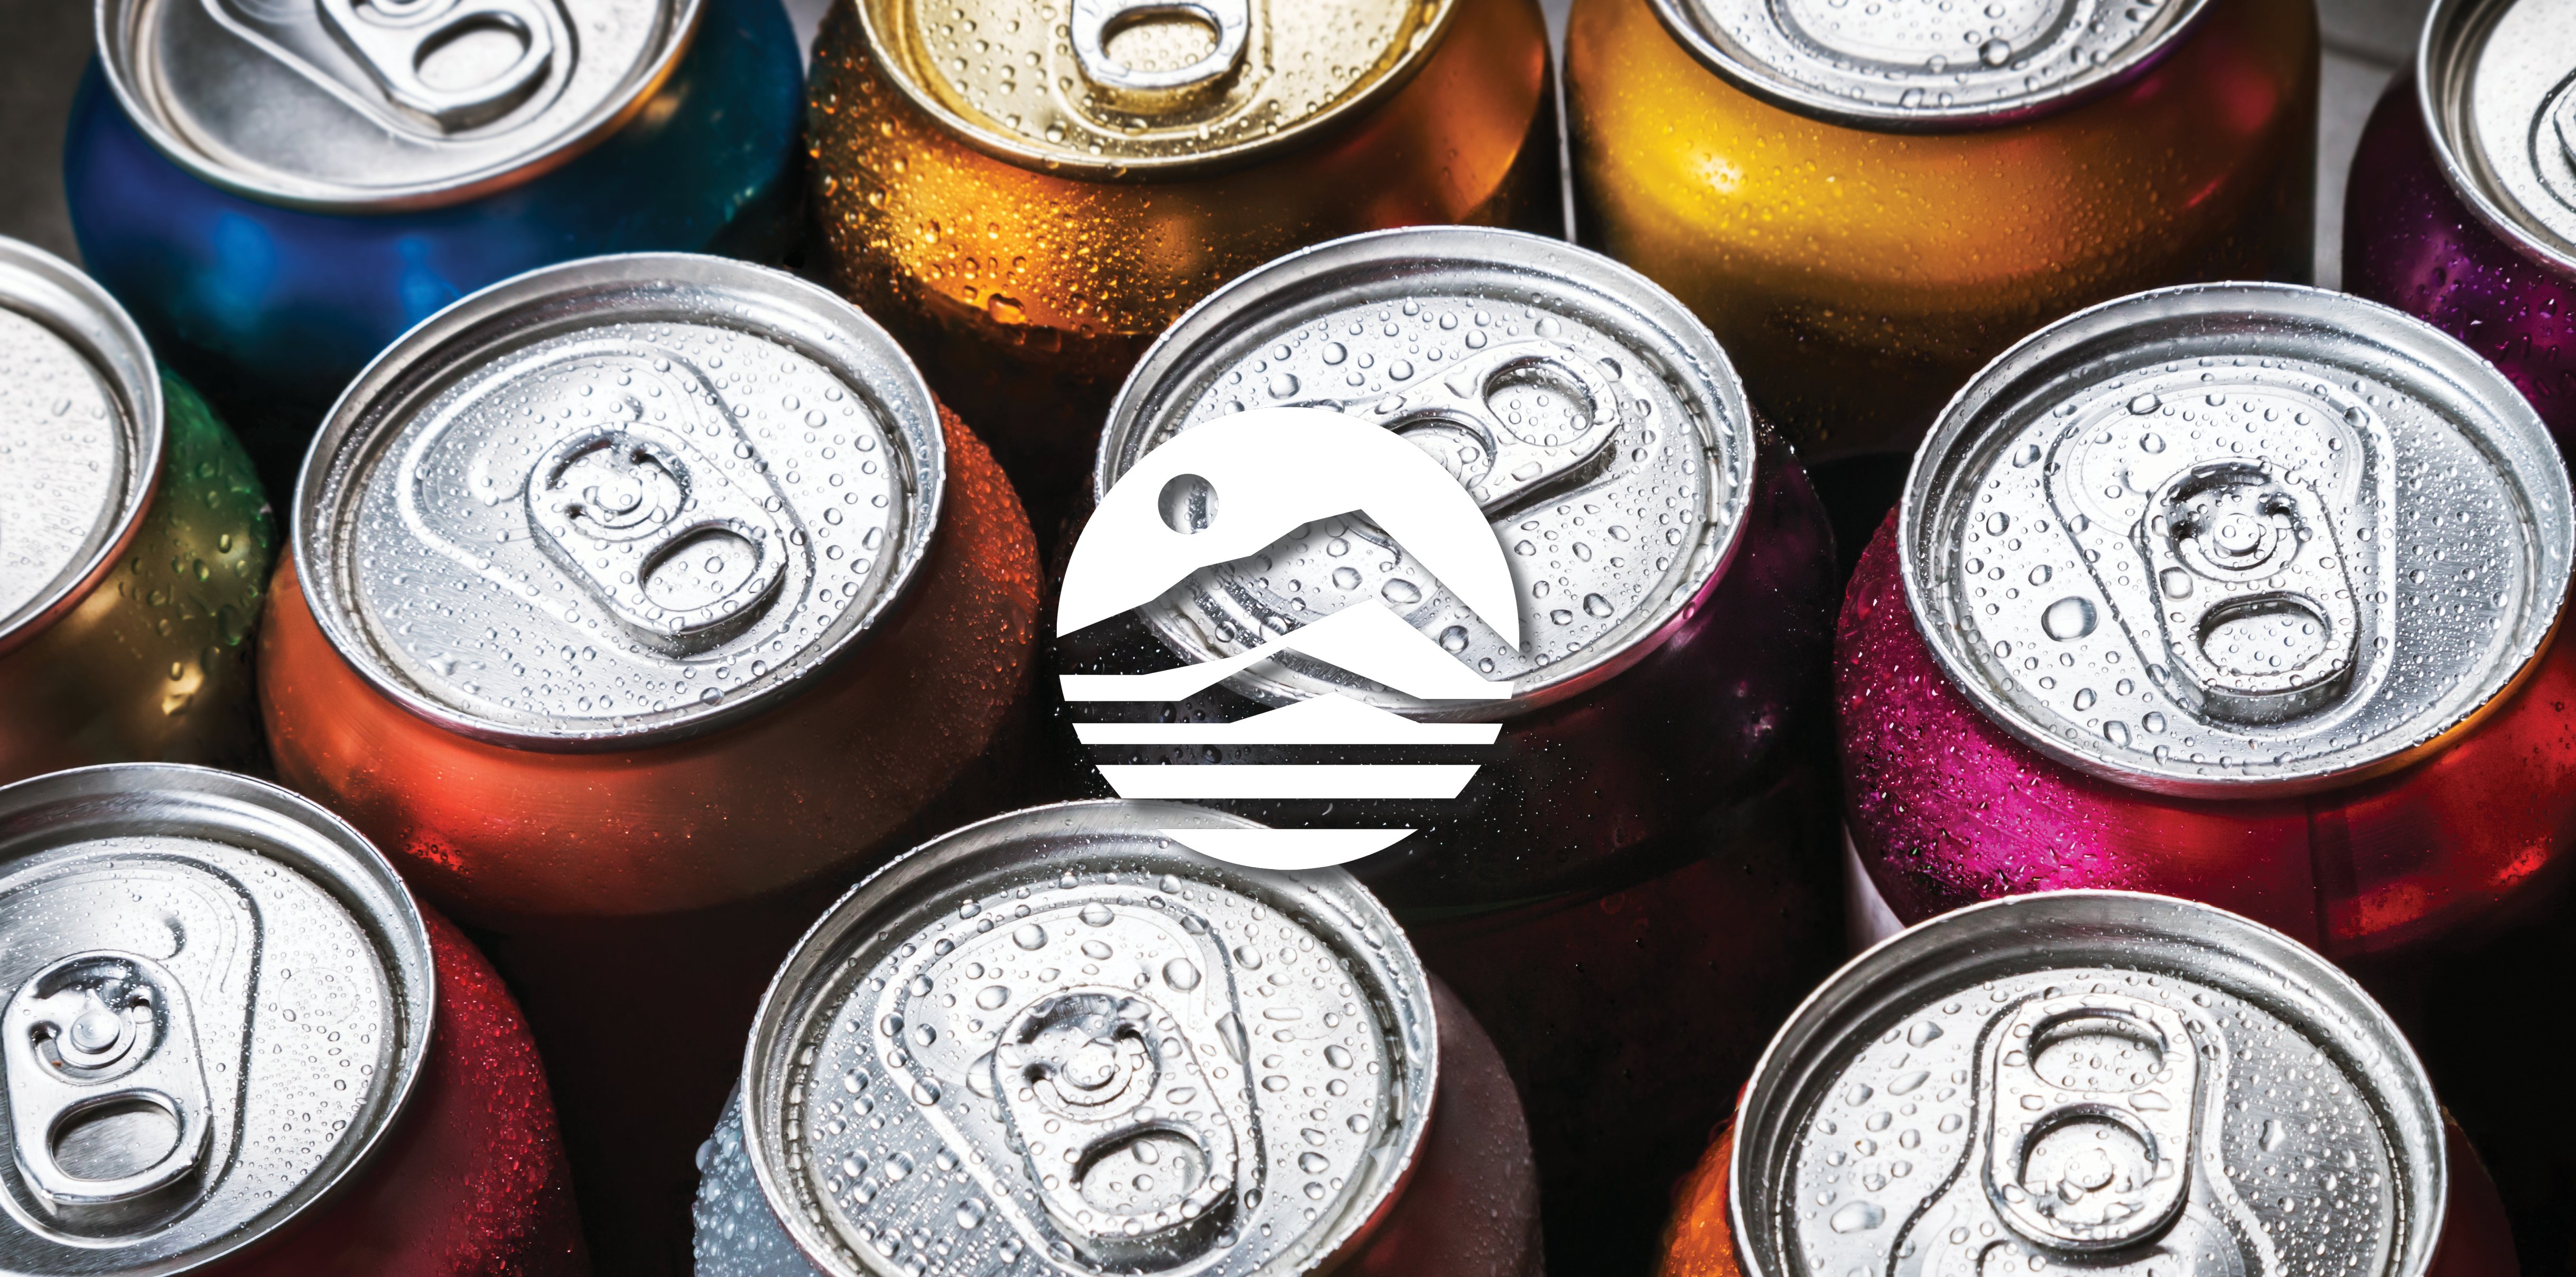 Multiple cans of yellow, blue, orange, pink, and red sodas, with The Alaska Club logo over-layed.